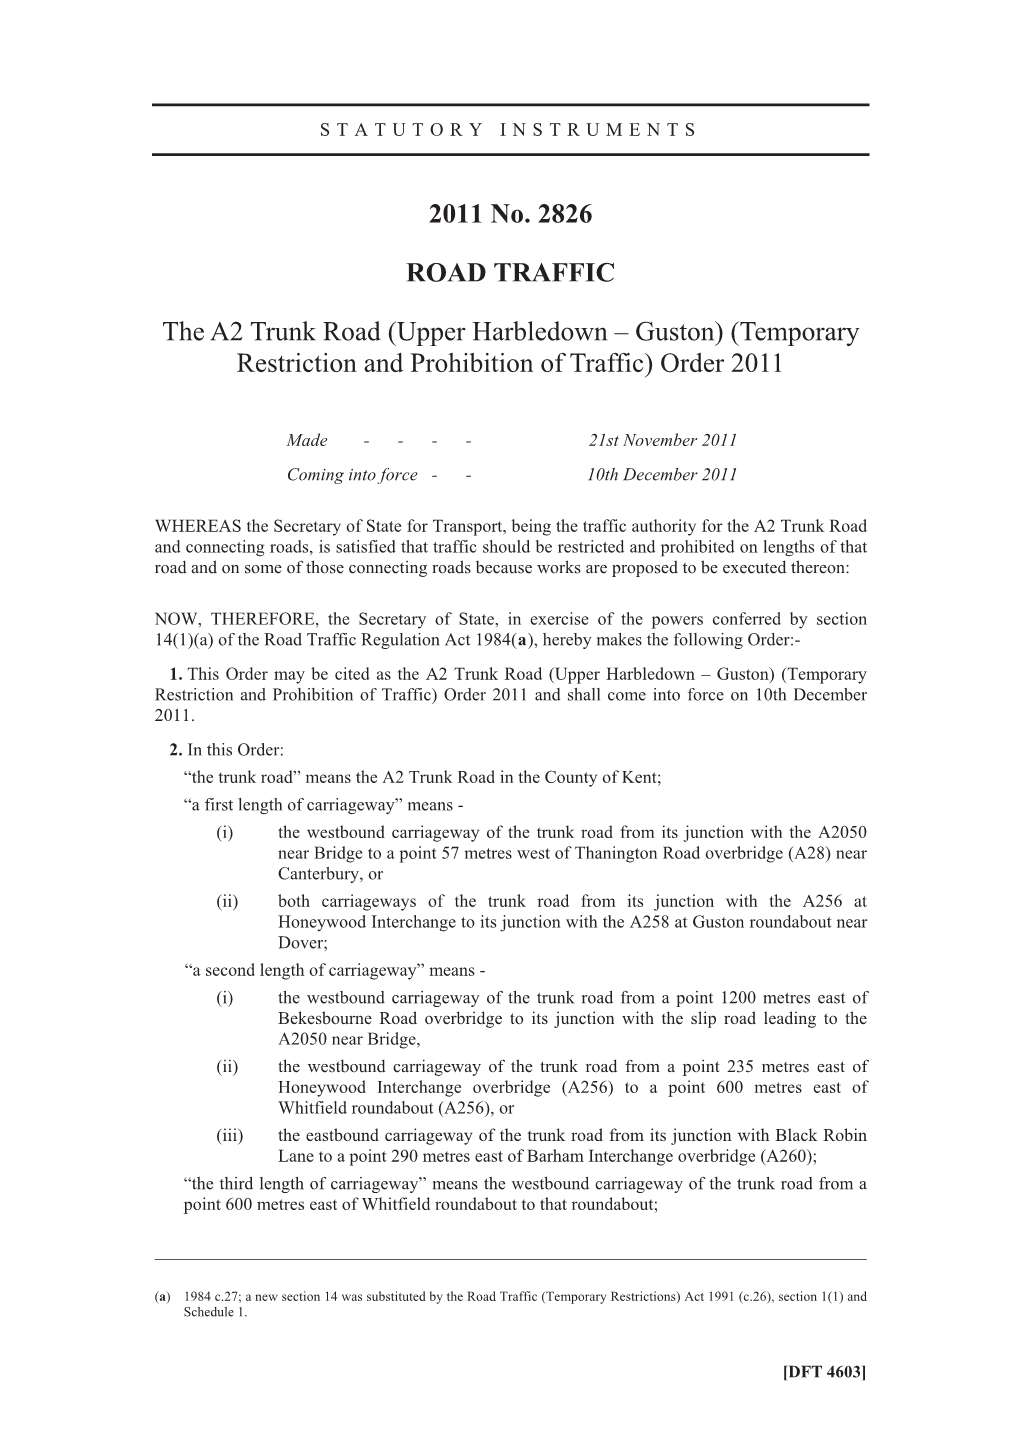 The A2 Trunk Road (Upper Harbledown – Guston) (Temporary Restriction and Prohibition of Traffic) Order 2011